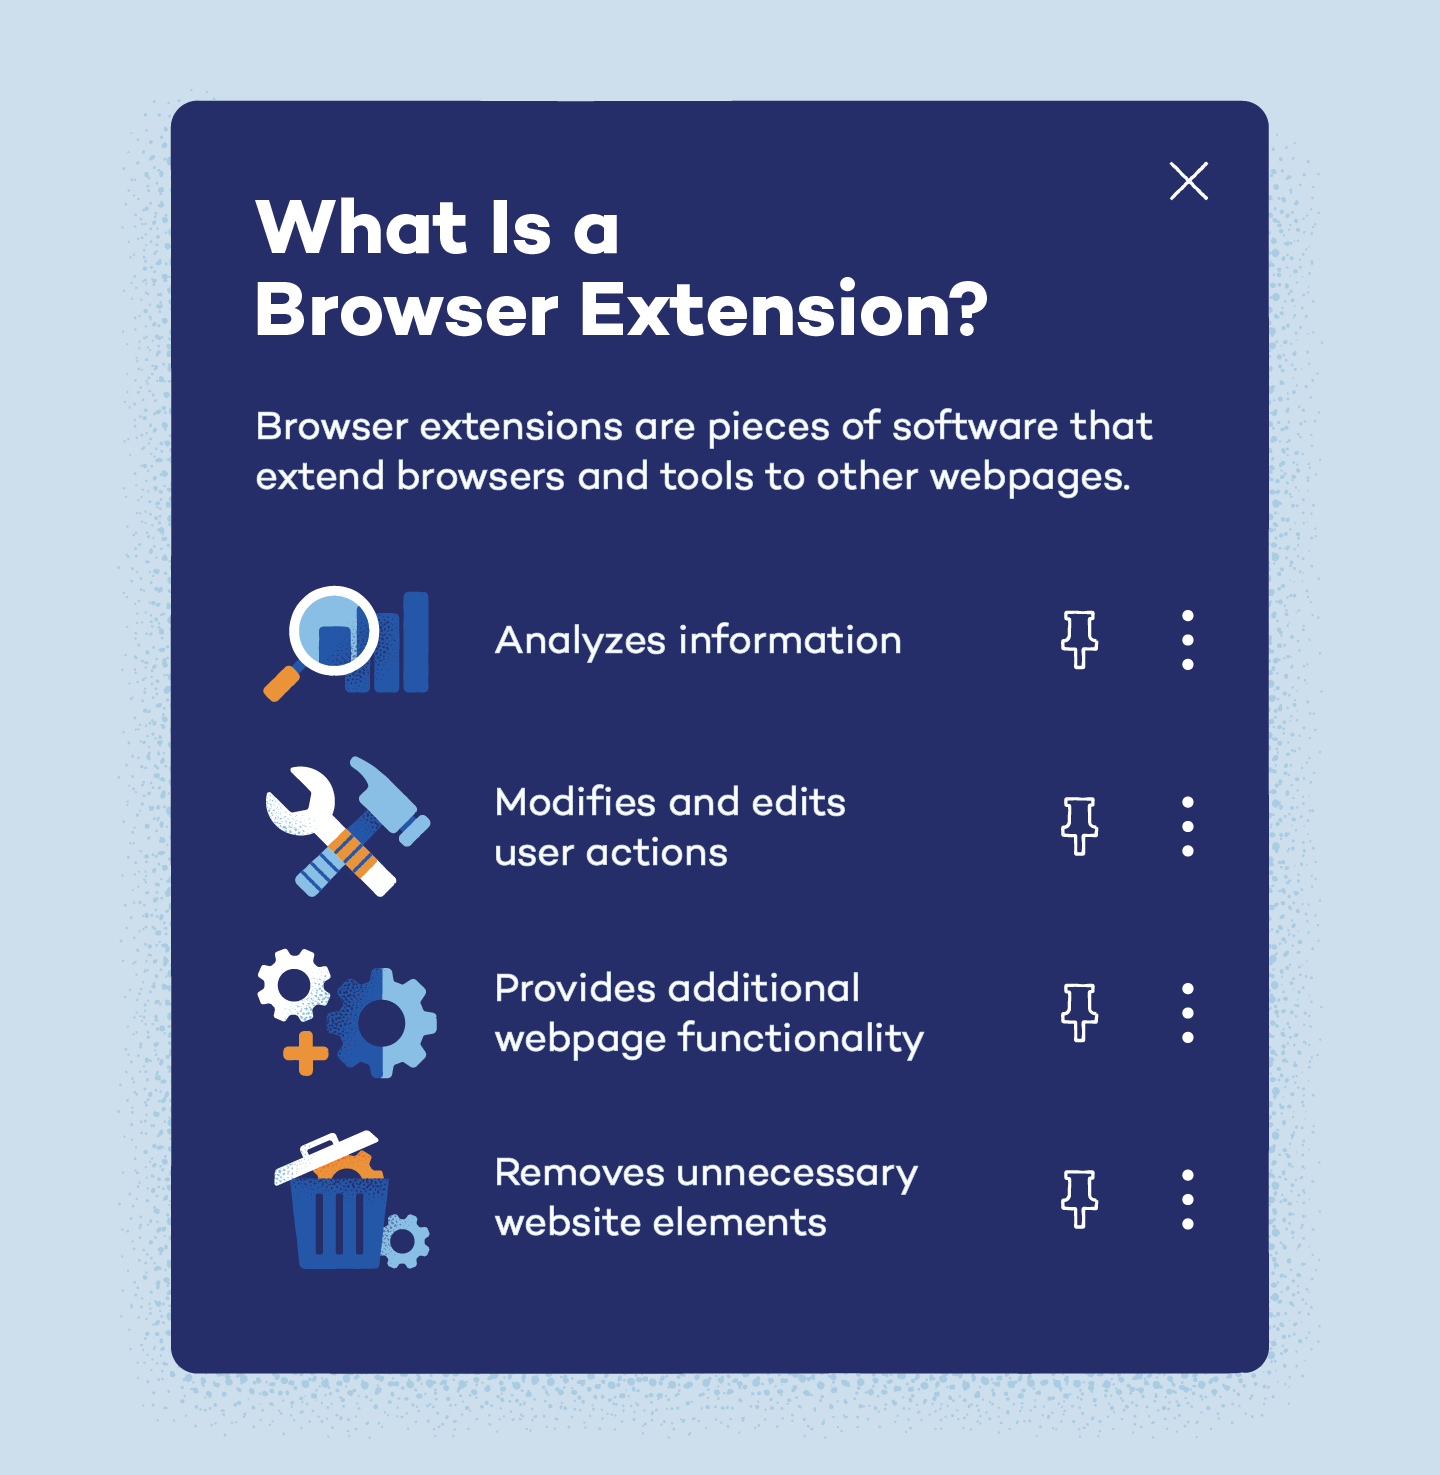 Browser extensions extend browsers and tools to other pages.